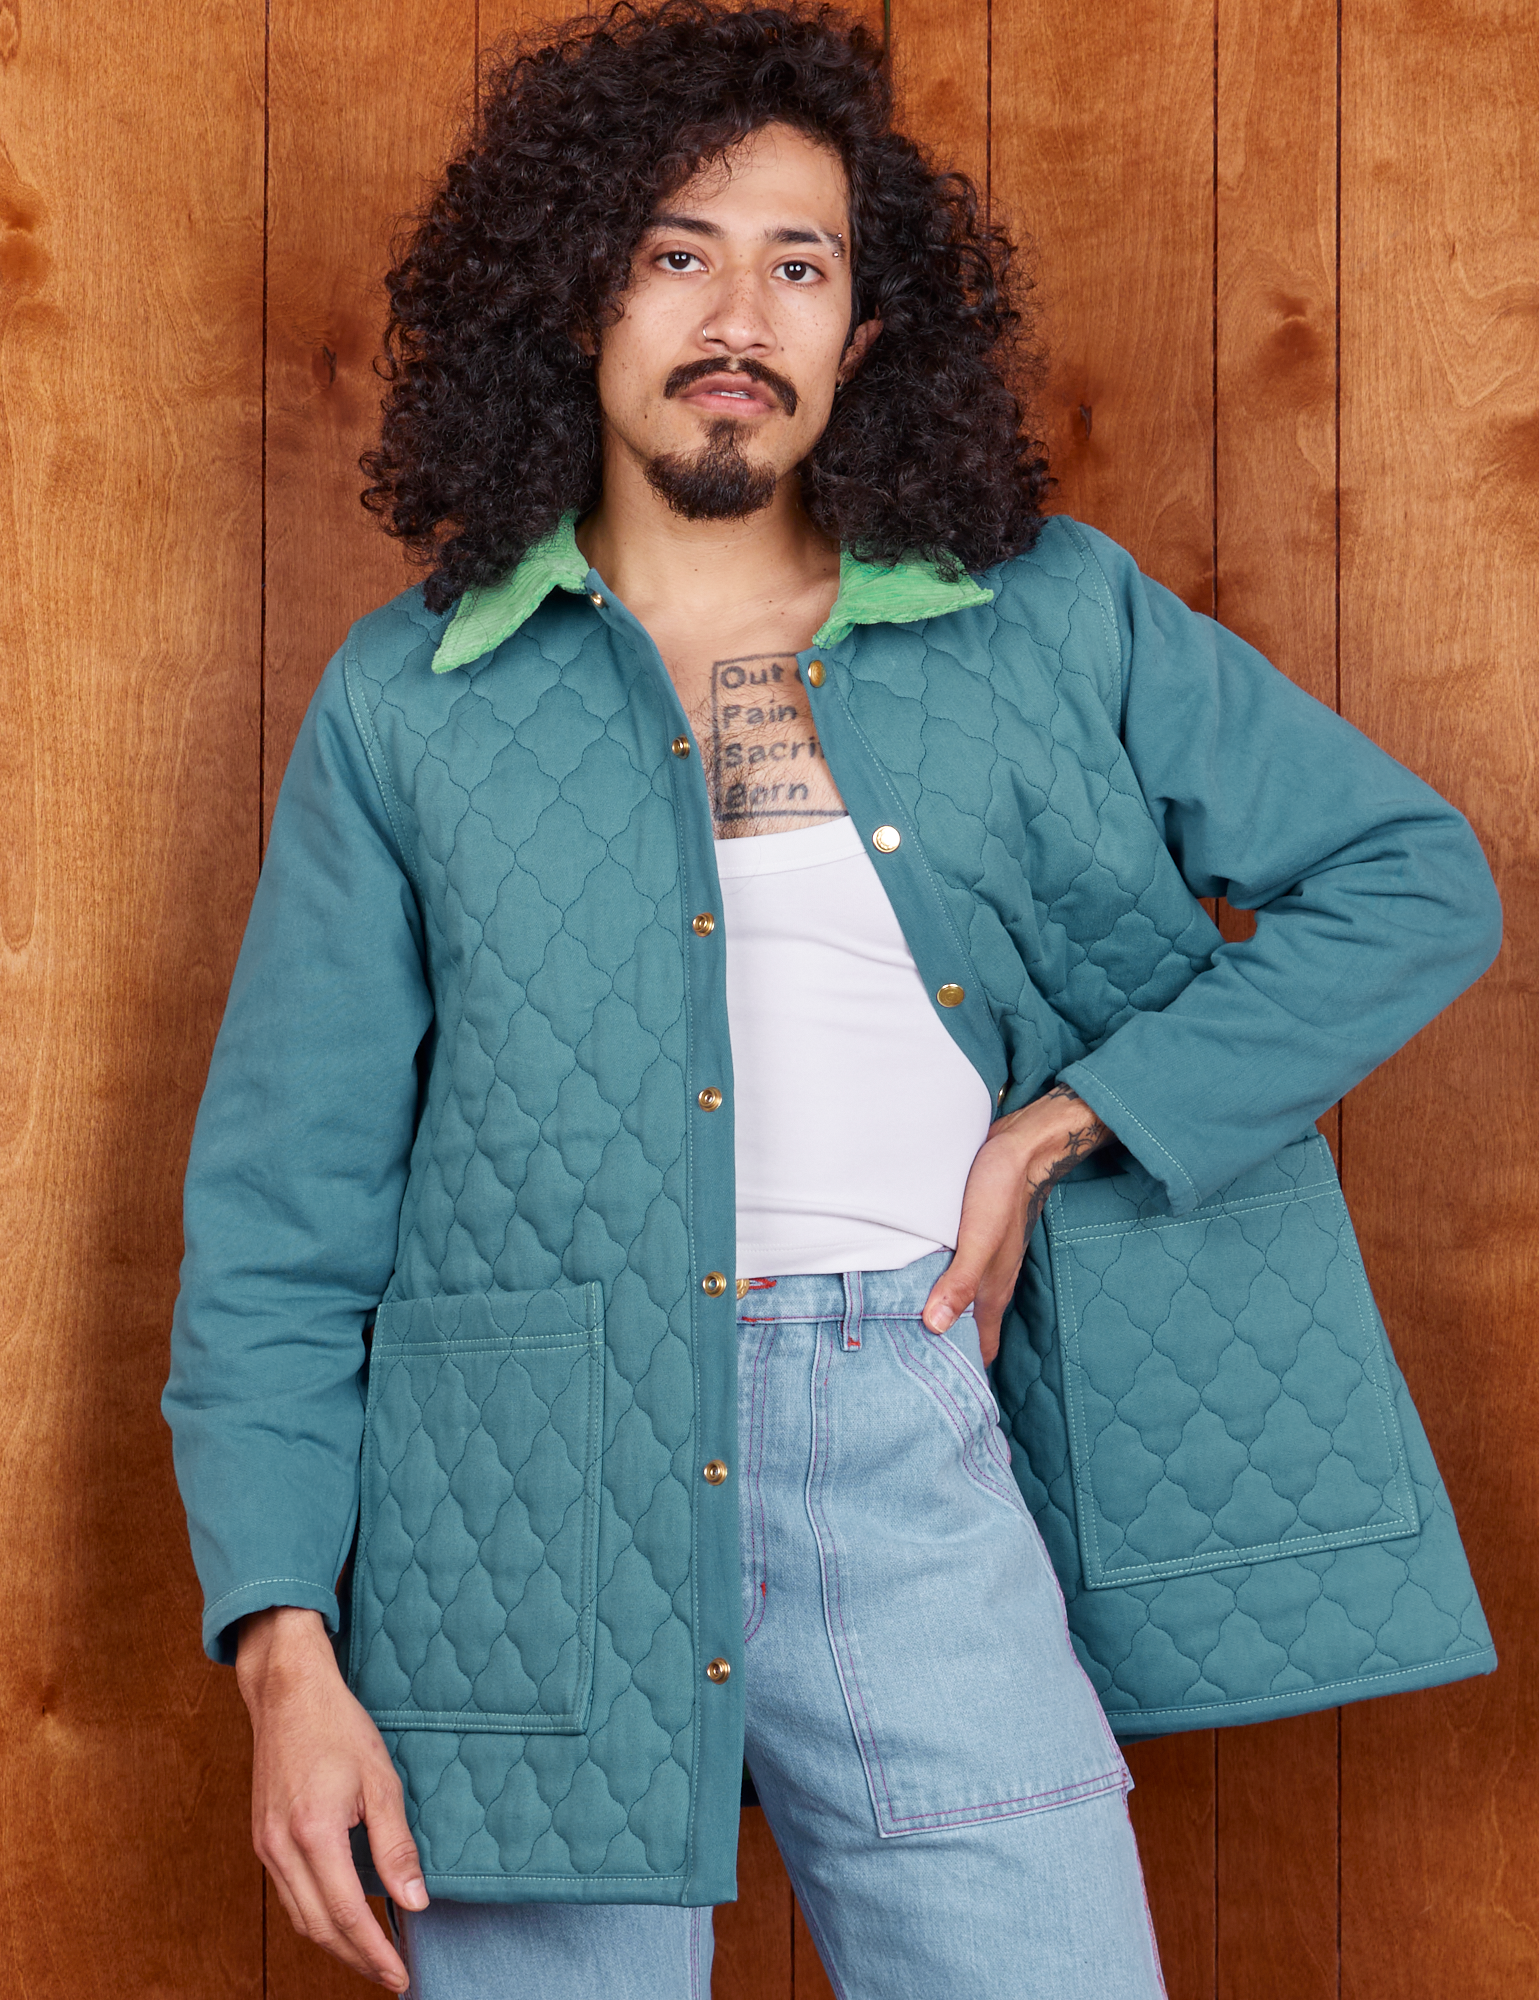 Jesse is wearing Quilted Overcoat in Marine Blue